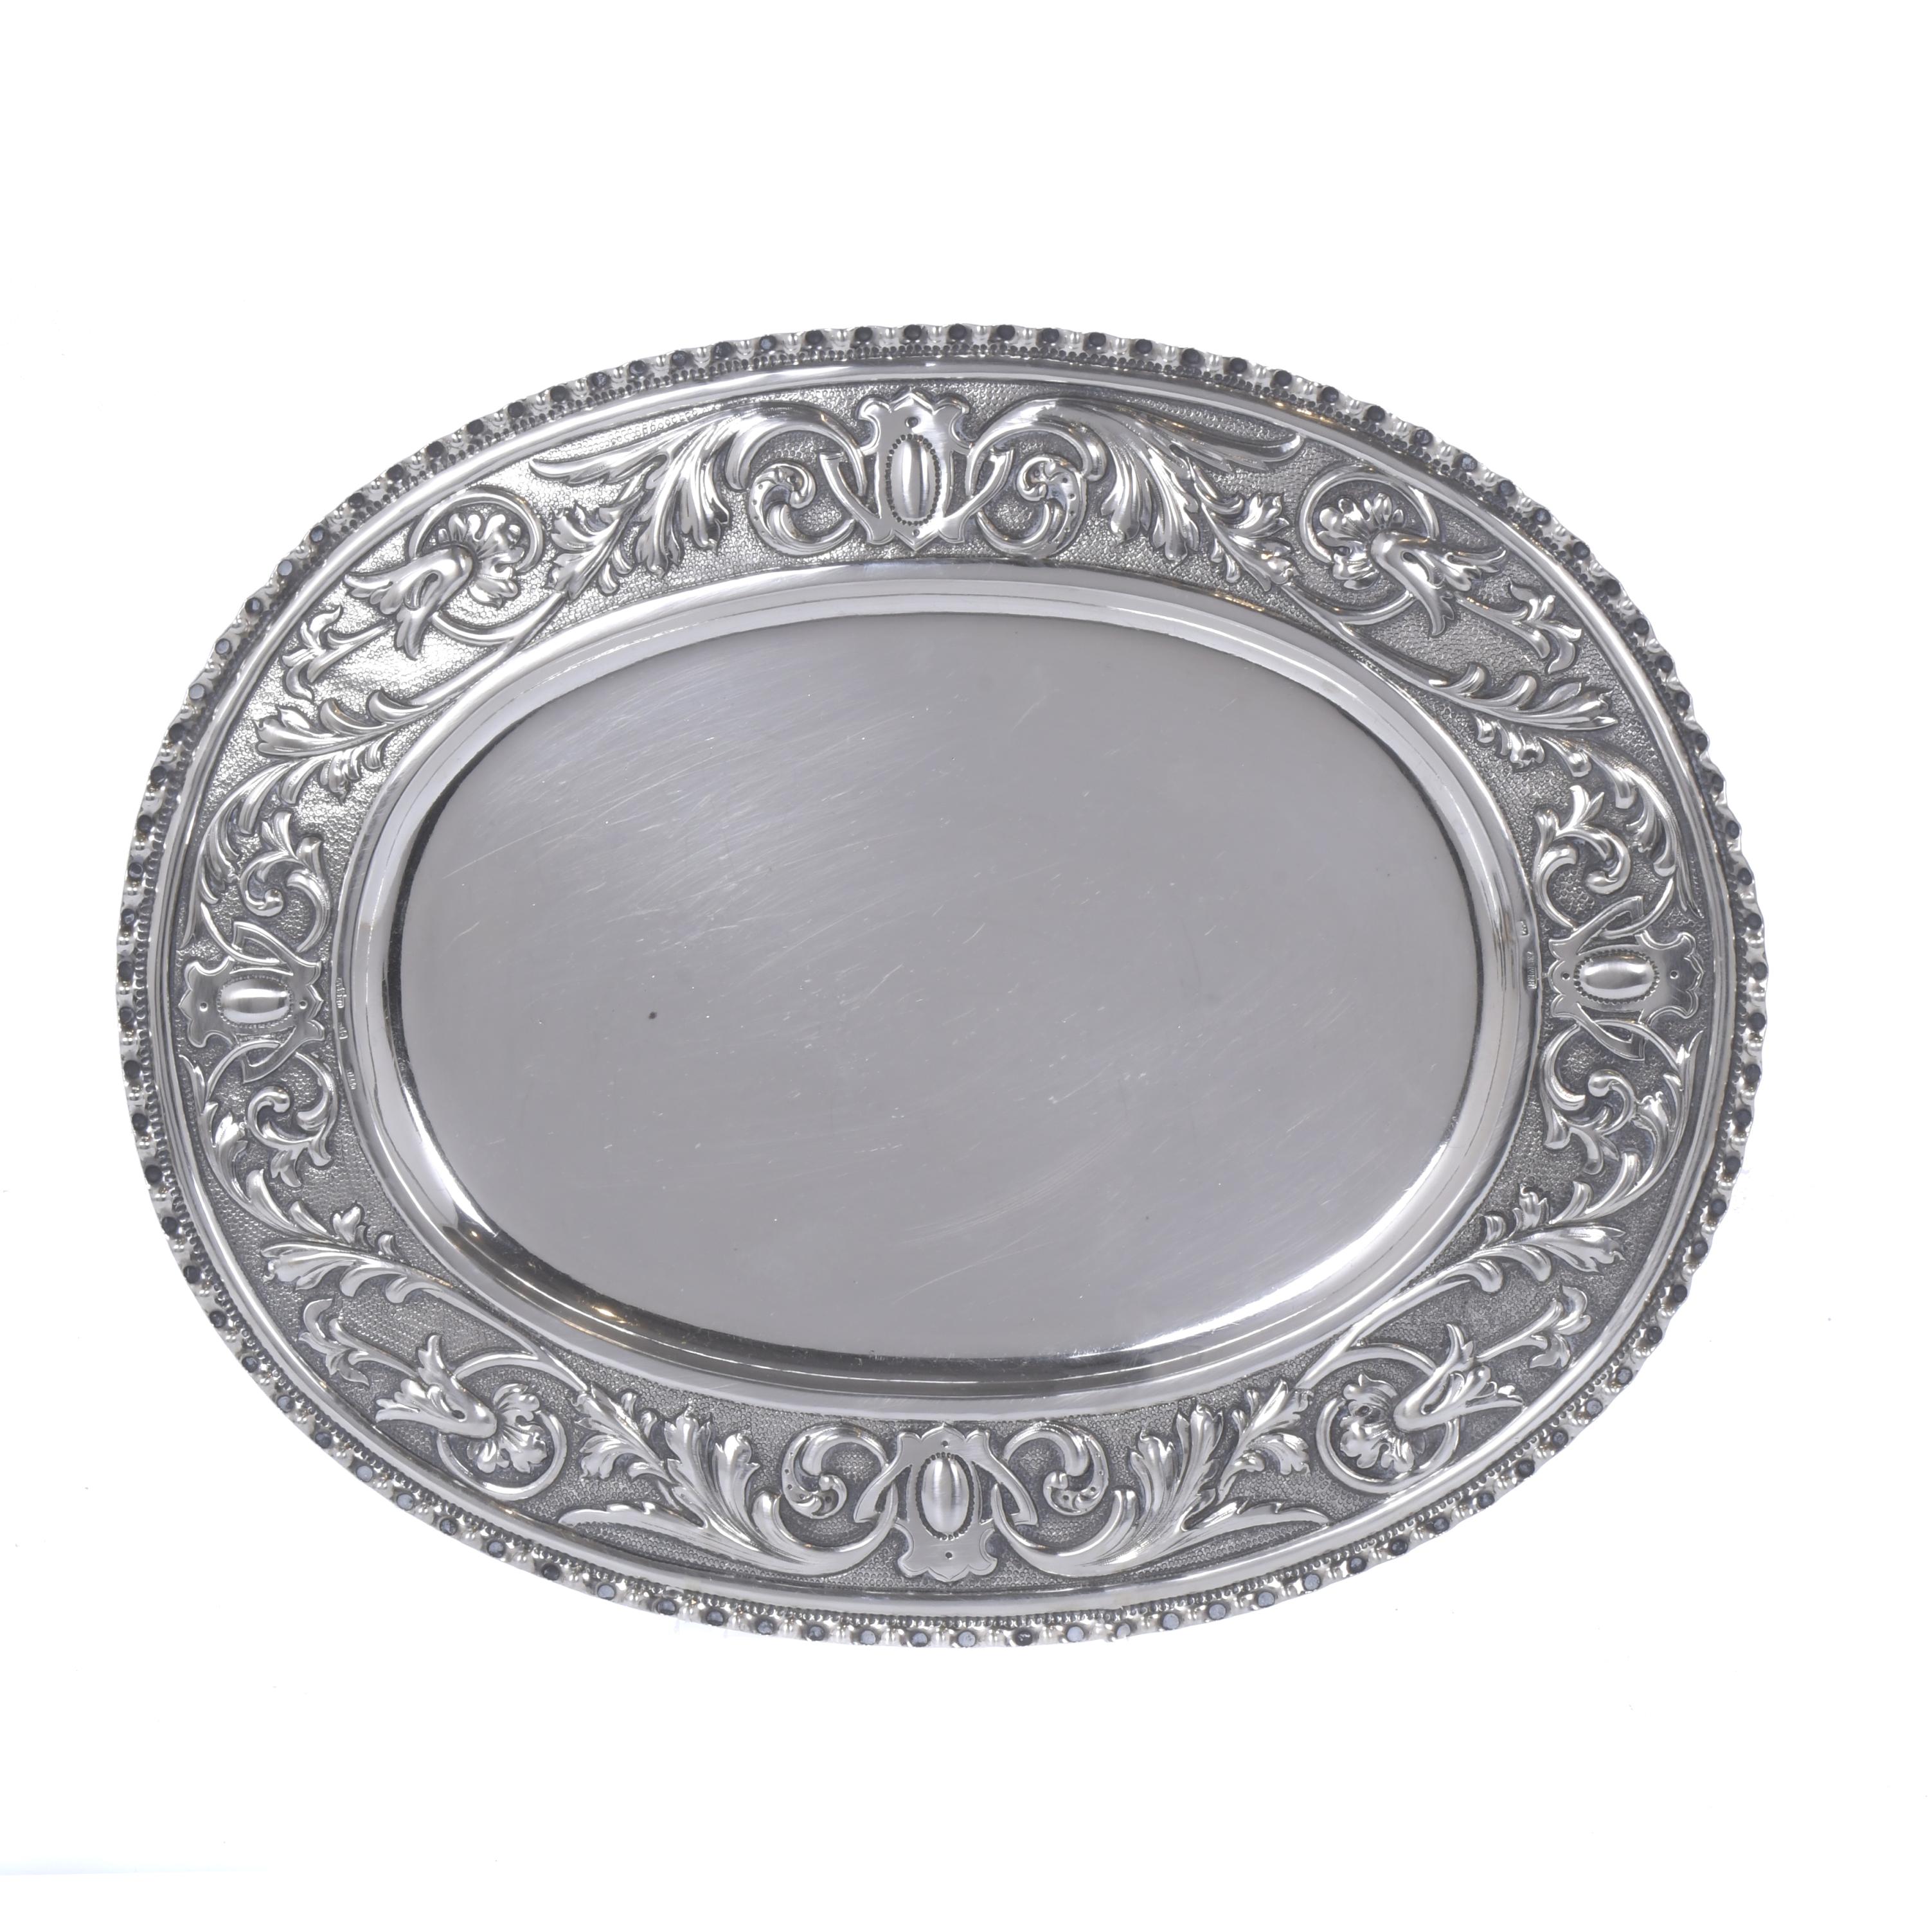 TRAY IN SPANISH SILVER BY SILVERSMITH BERMUDEZ. EARLY 20TH 